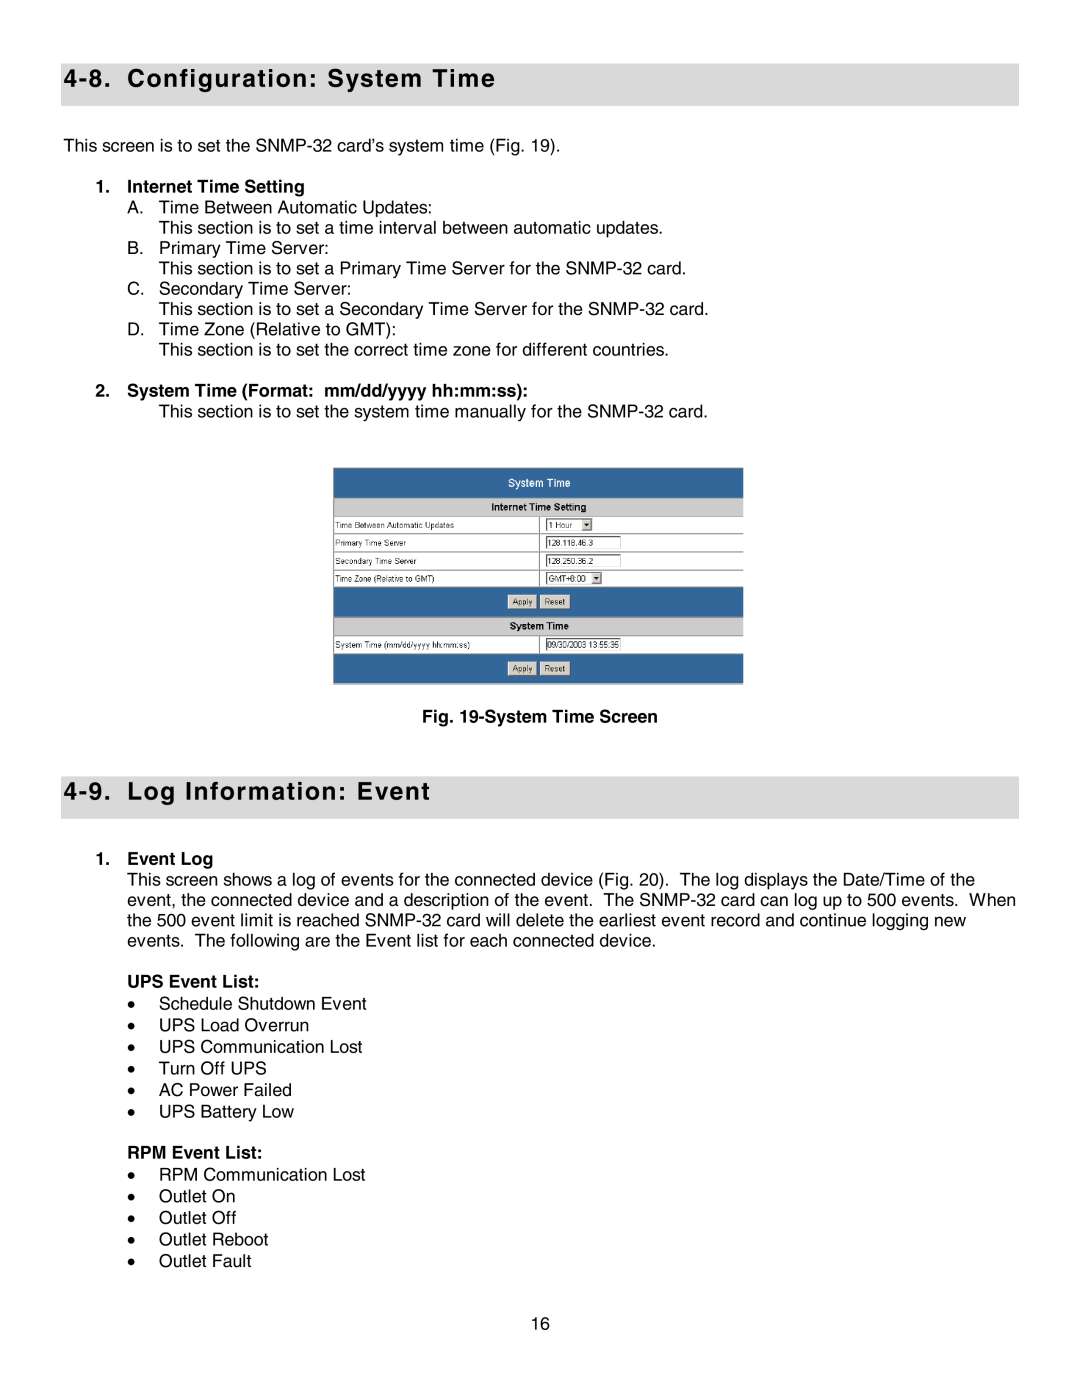 Minuteman UPS SNMP-32 Series Configuration System Time, Log Information Event, Internet Time Setting, System Time Screen 